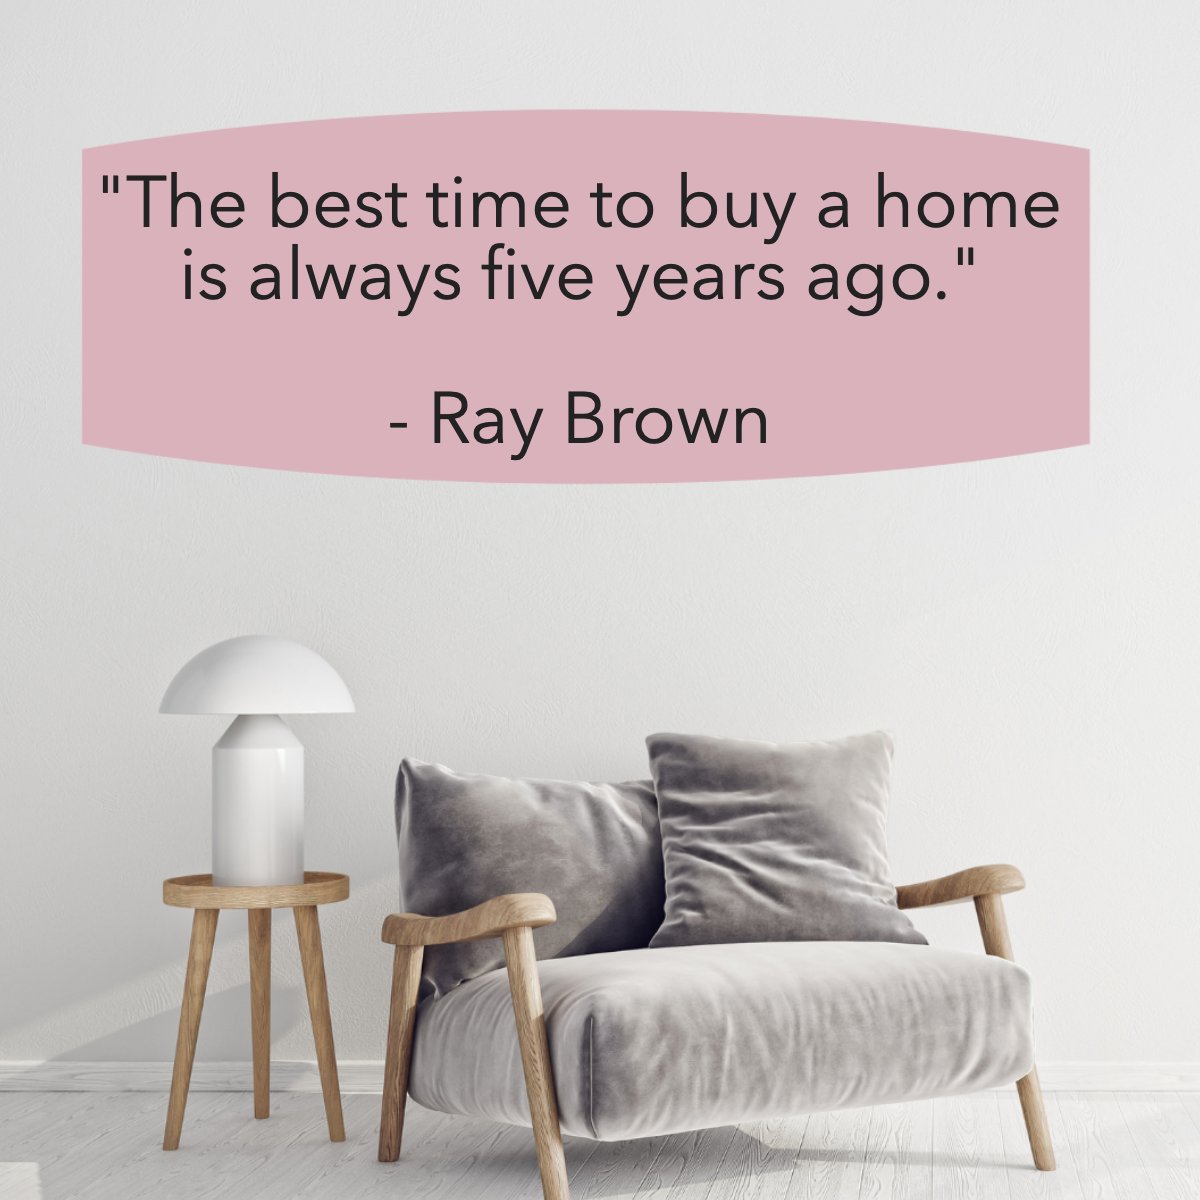 'The best time to buy a home is always five years ago'
― Ray Brown 📖

#home #homesale #hometime #besttimetobuy #quoteoftheday #quotes #raybrown
 #realestate #realtor #newhome #househunting #renatashomes #kellerwilliamas #homebuyers #homesellers #capitaldistrict